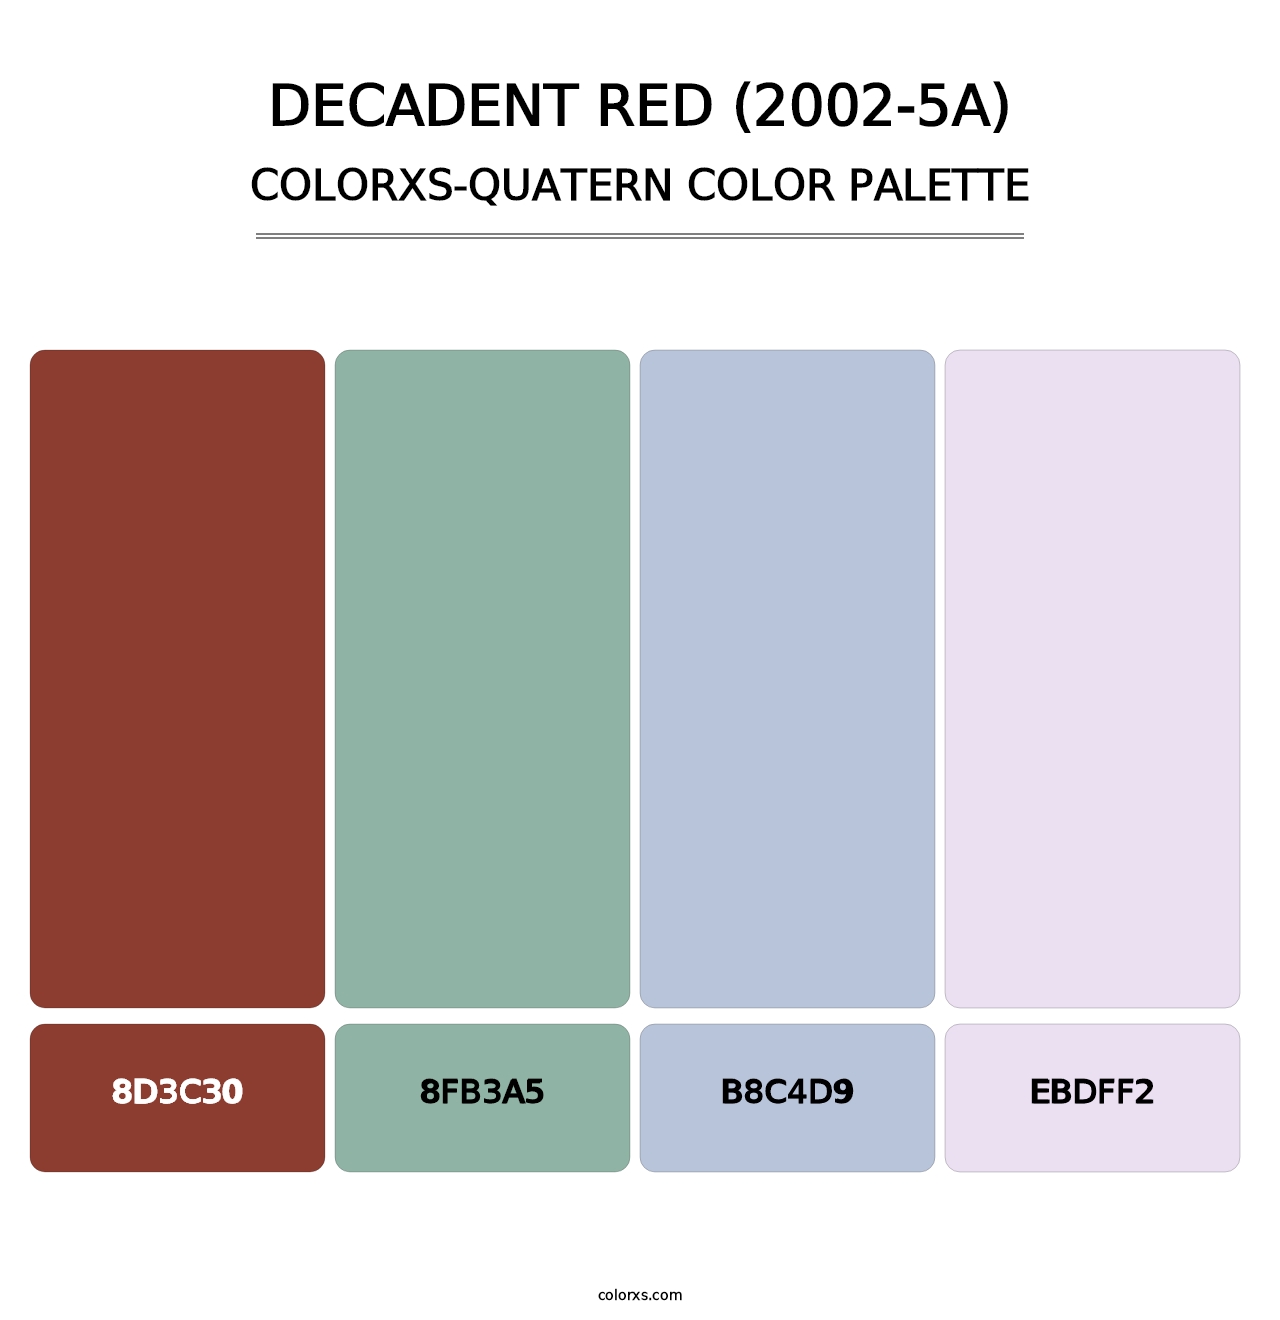 Decadent Red (2002-5A) - Colorxs Quatern Palette